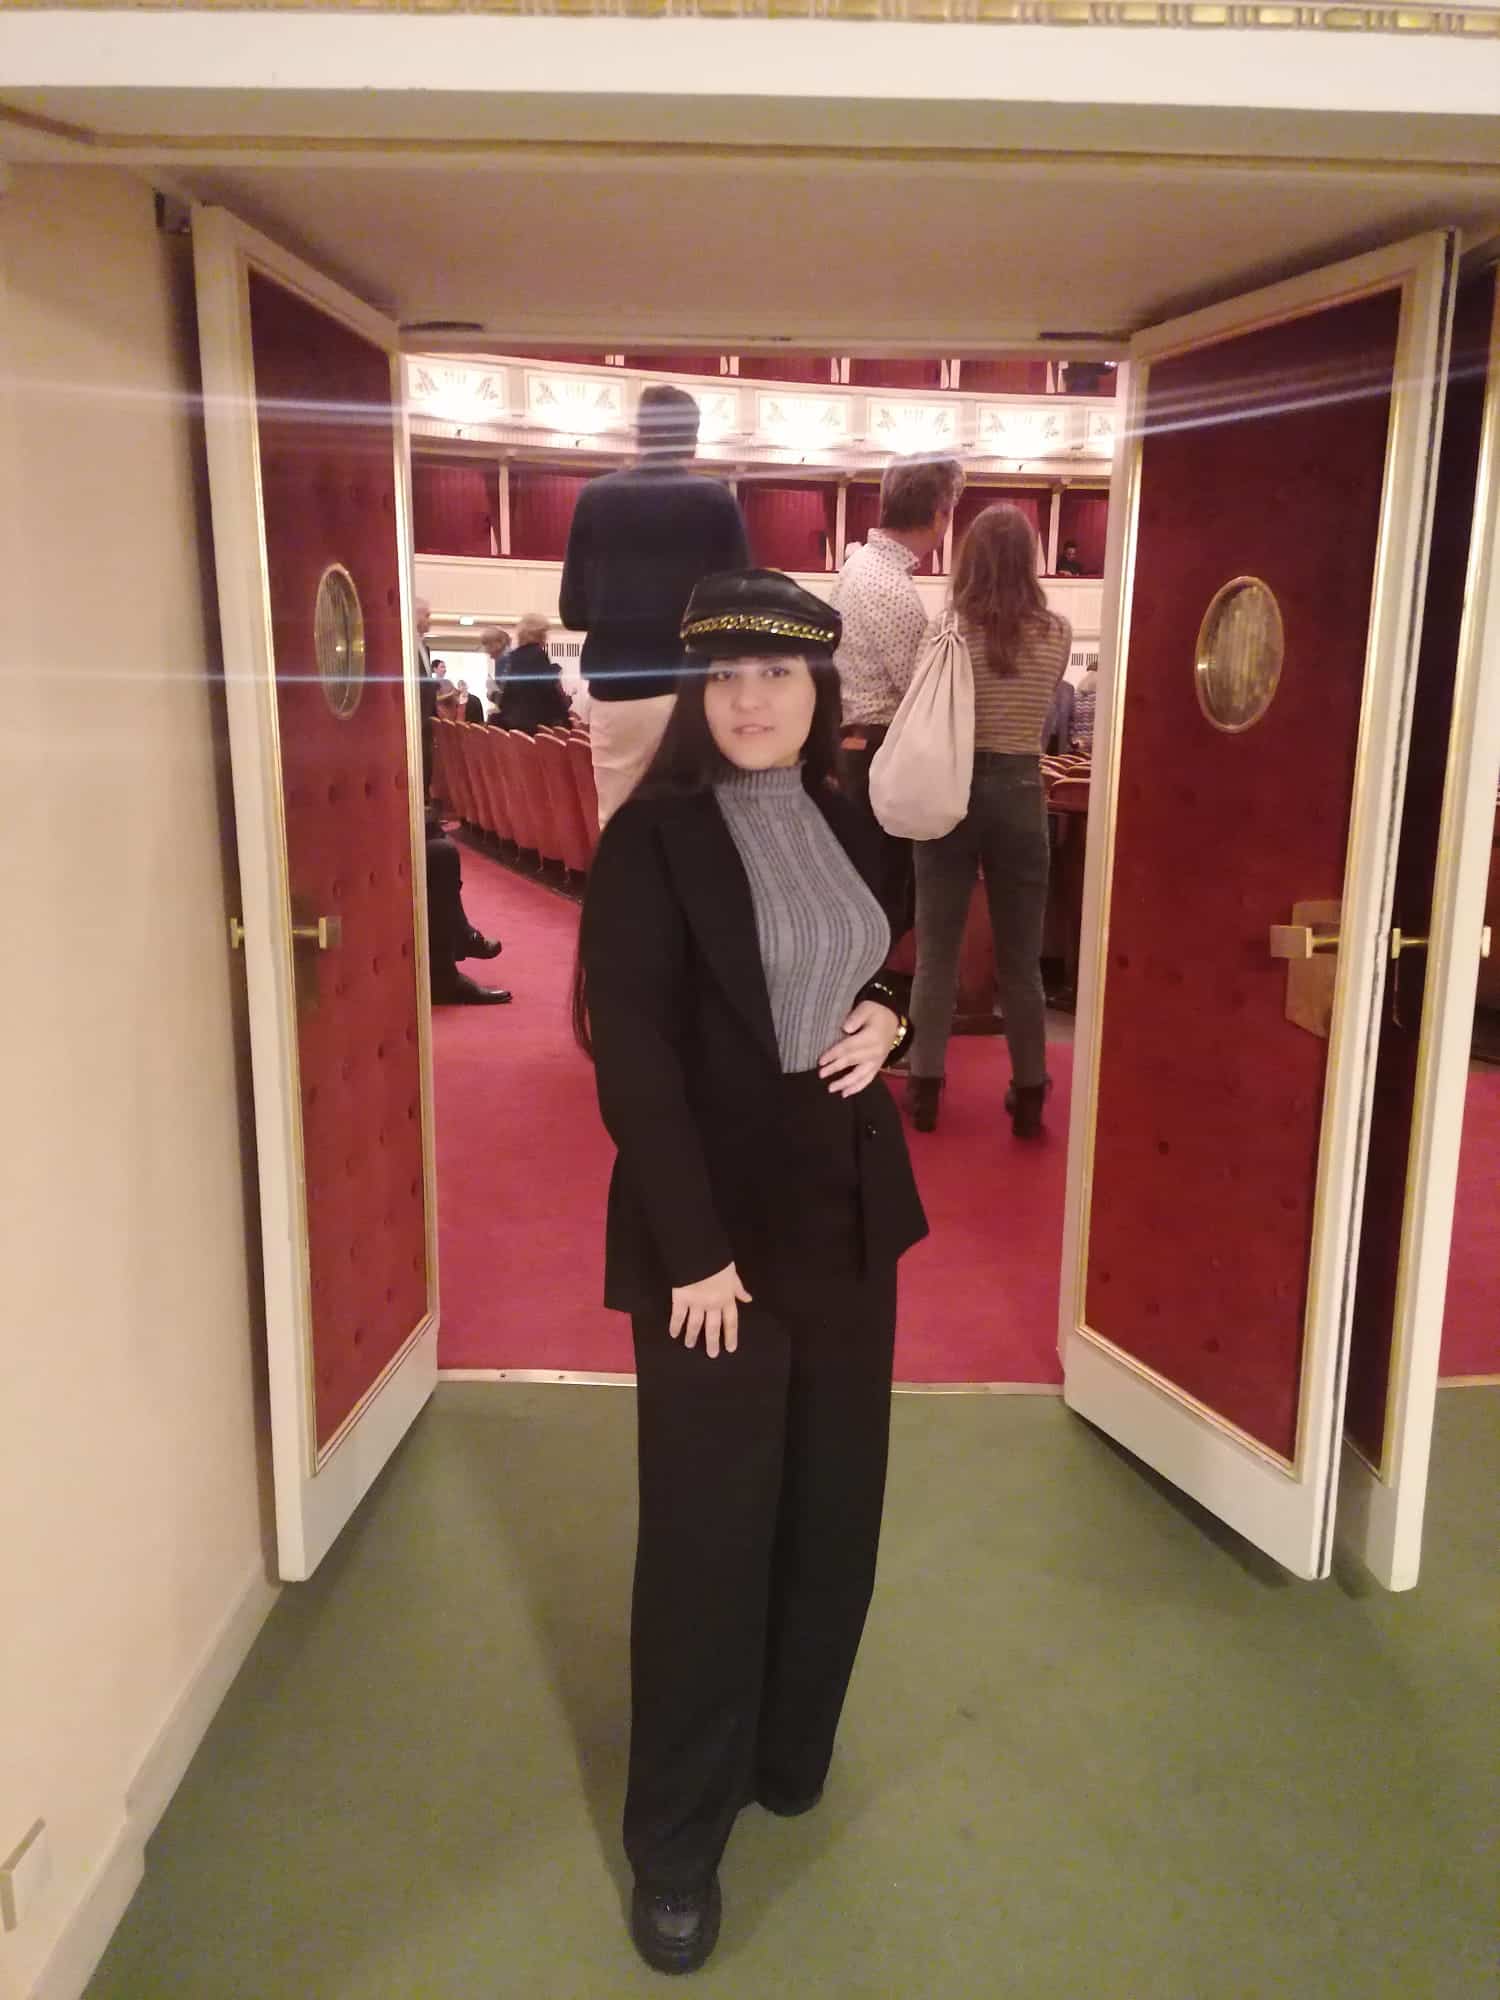 Watching the Magic Flute at the Vienna State Opera